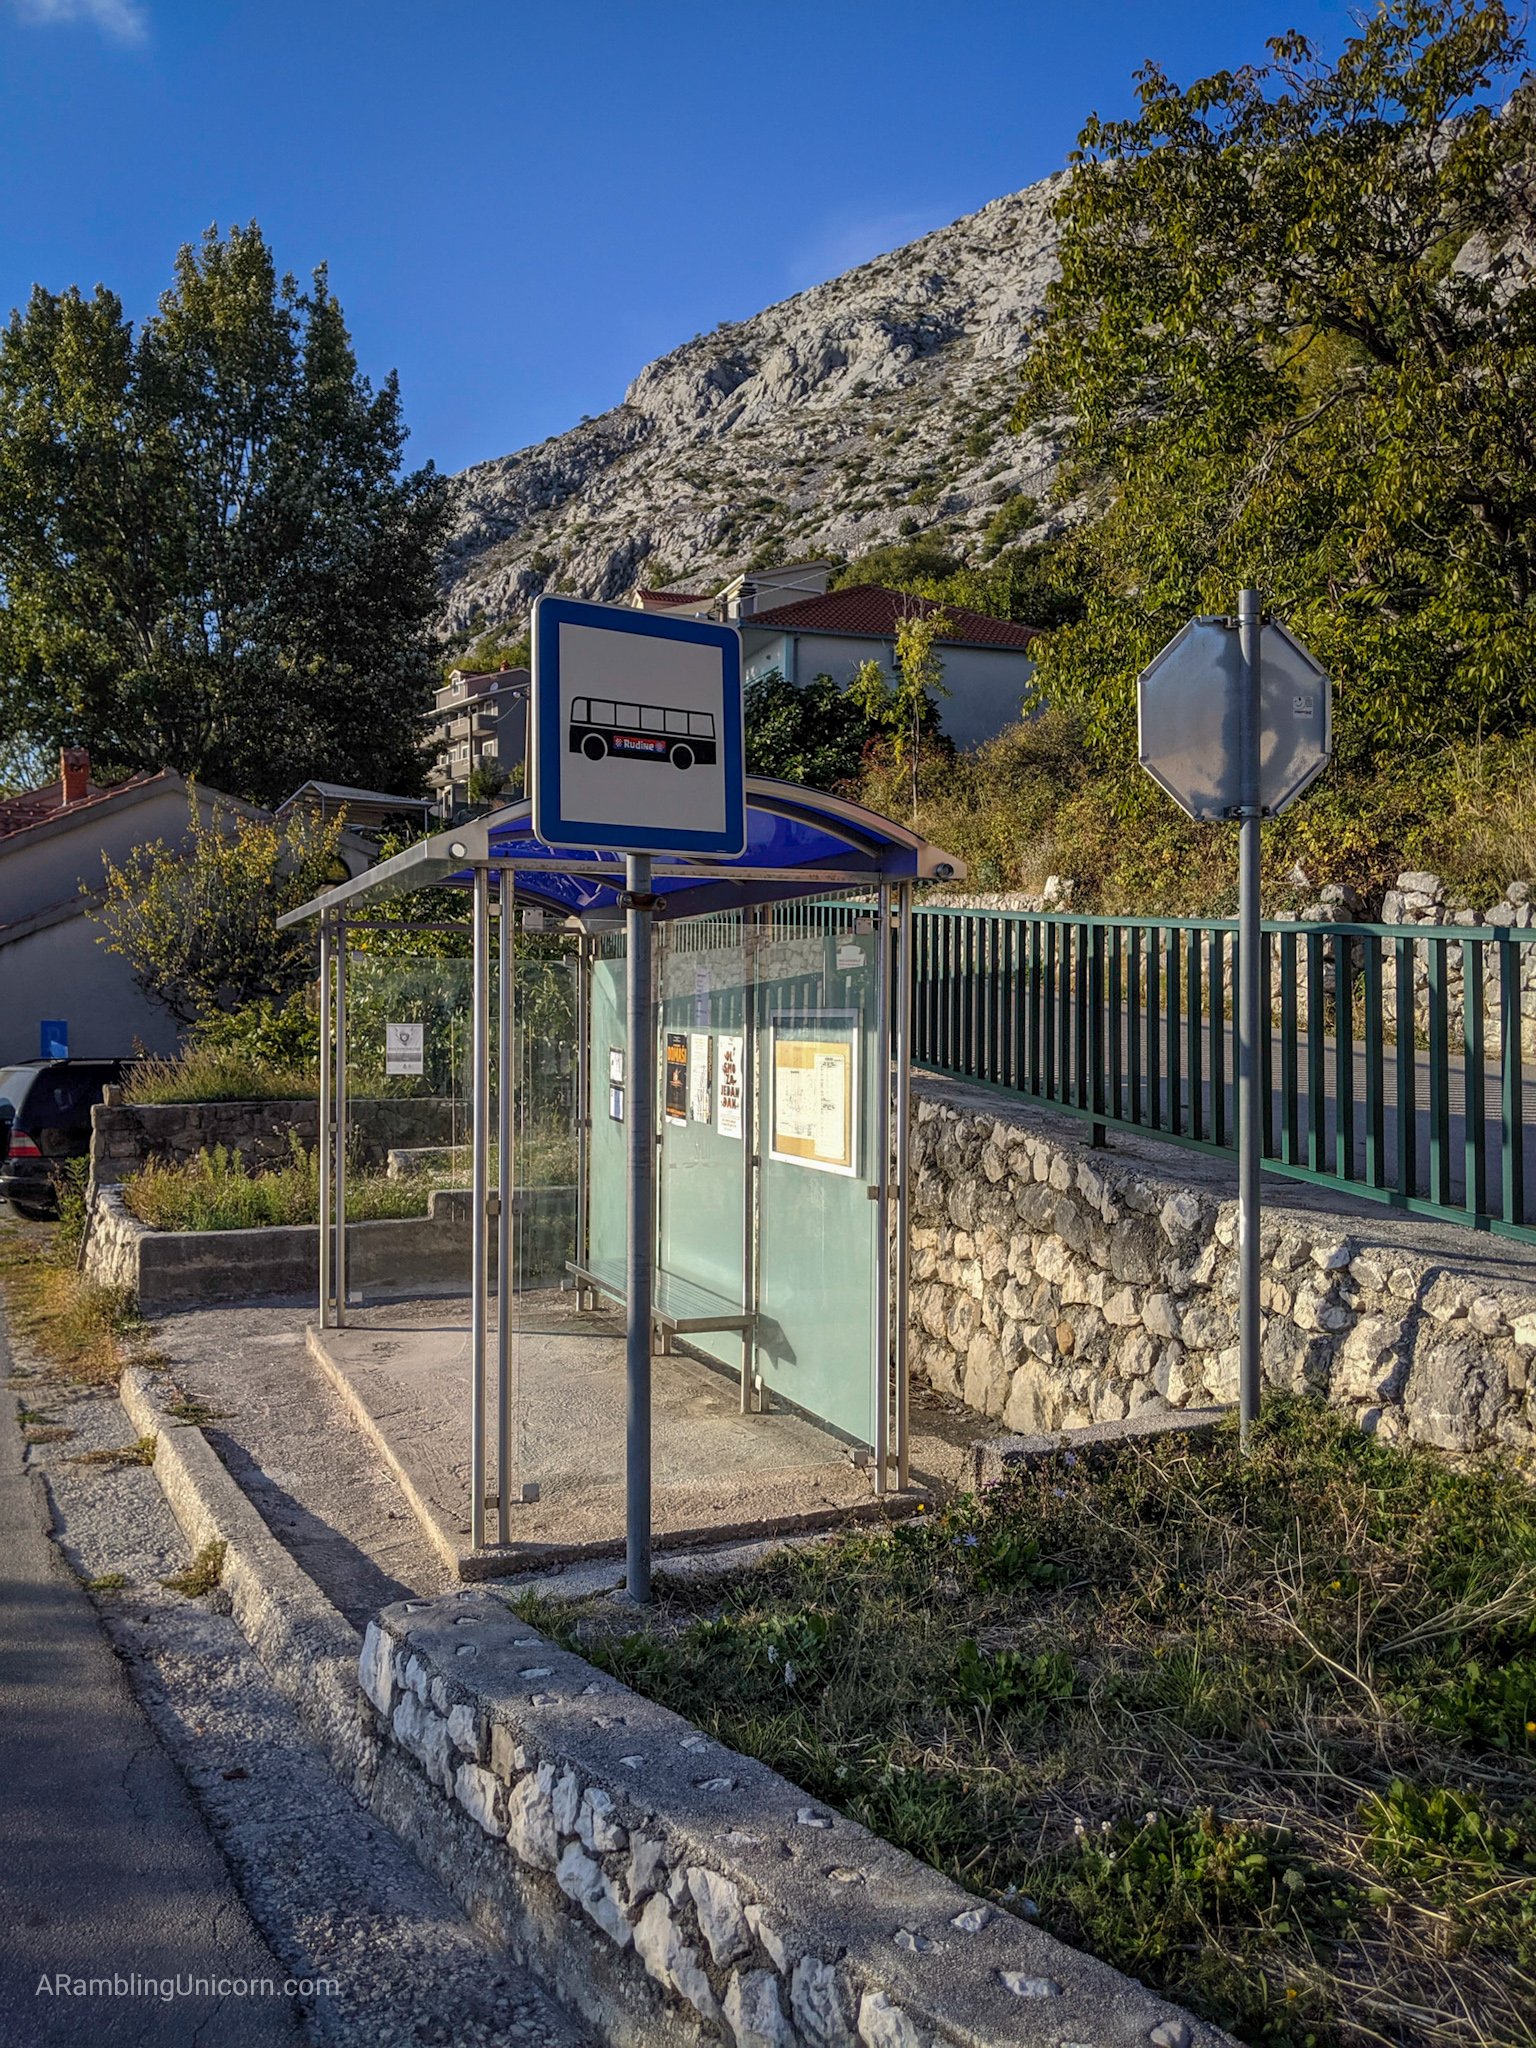 Local bus stop at Gornje Sitno, which is at the base of Mount Mosor.